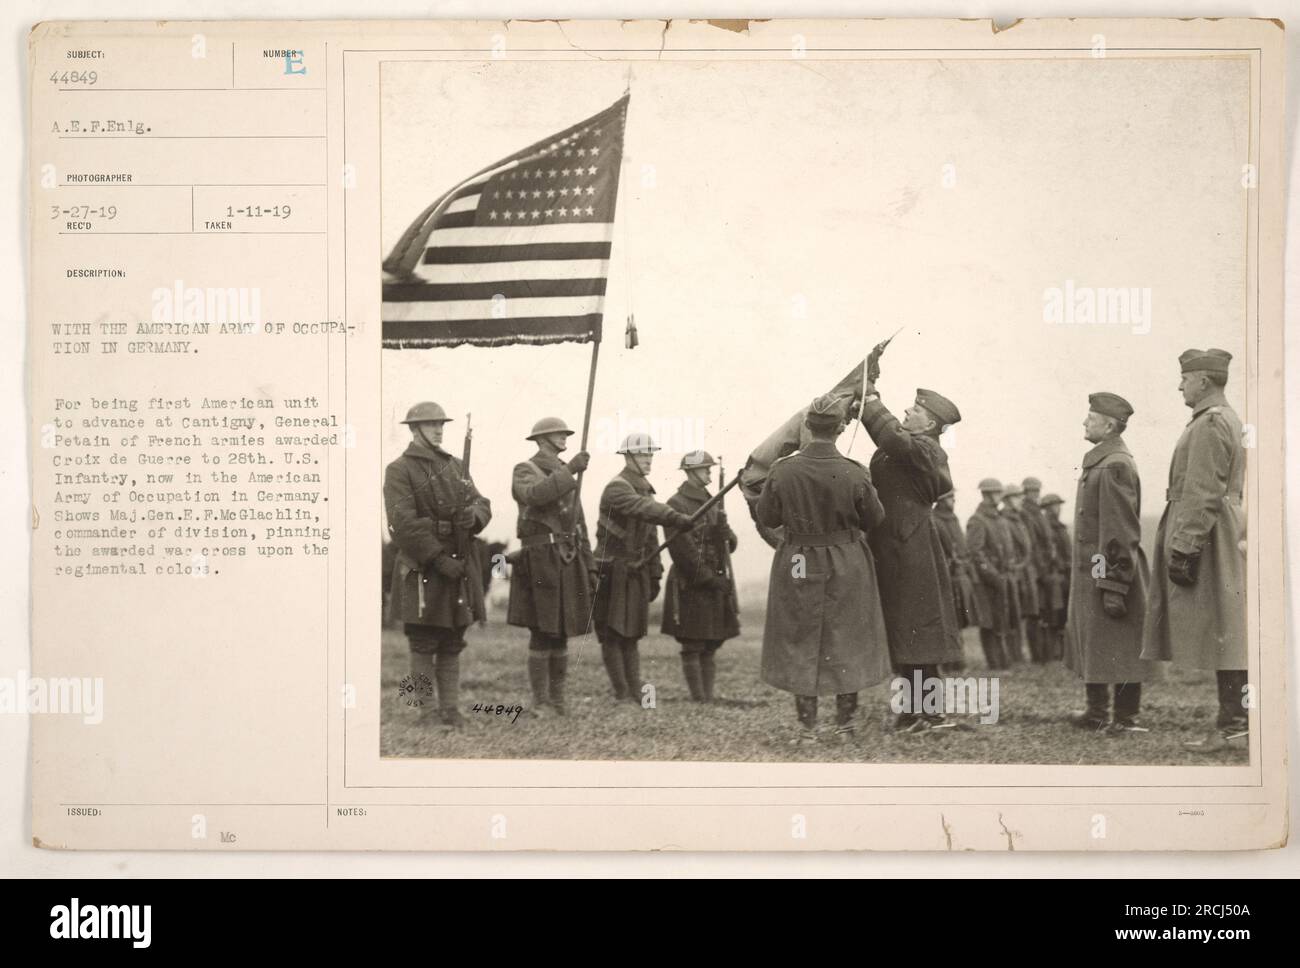 Major General E.P. McGlachlin, commander of the division, awards the Croix de Guerre to members of the 28th U.S. Infantry. The 28th U.S. Infantry was the first American unit to advance at Cantigny. They are now part of the American Army of Occupation in Germany. Stock Photo